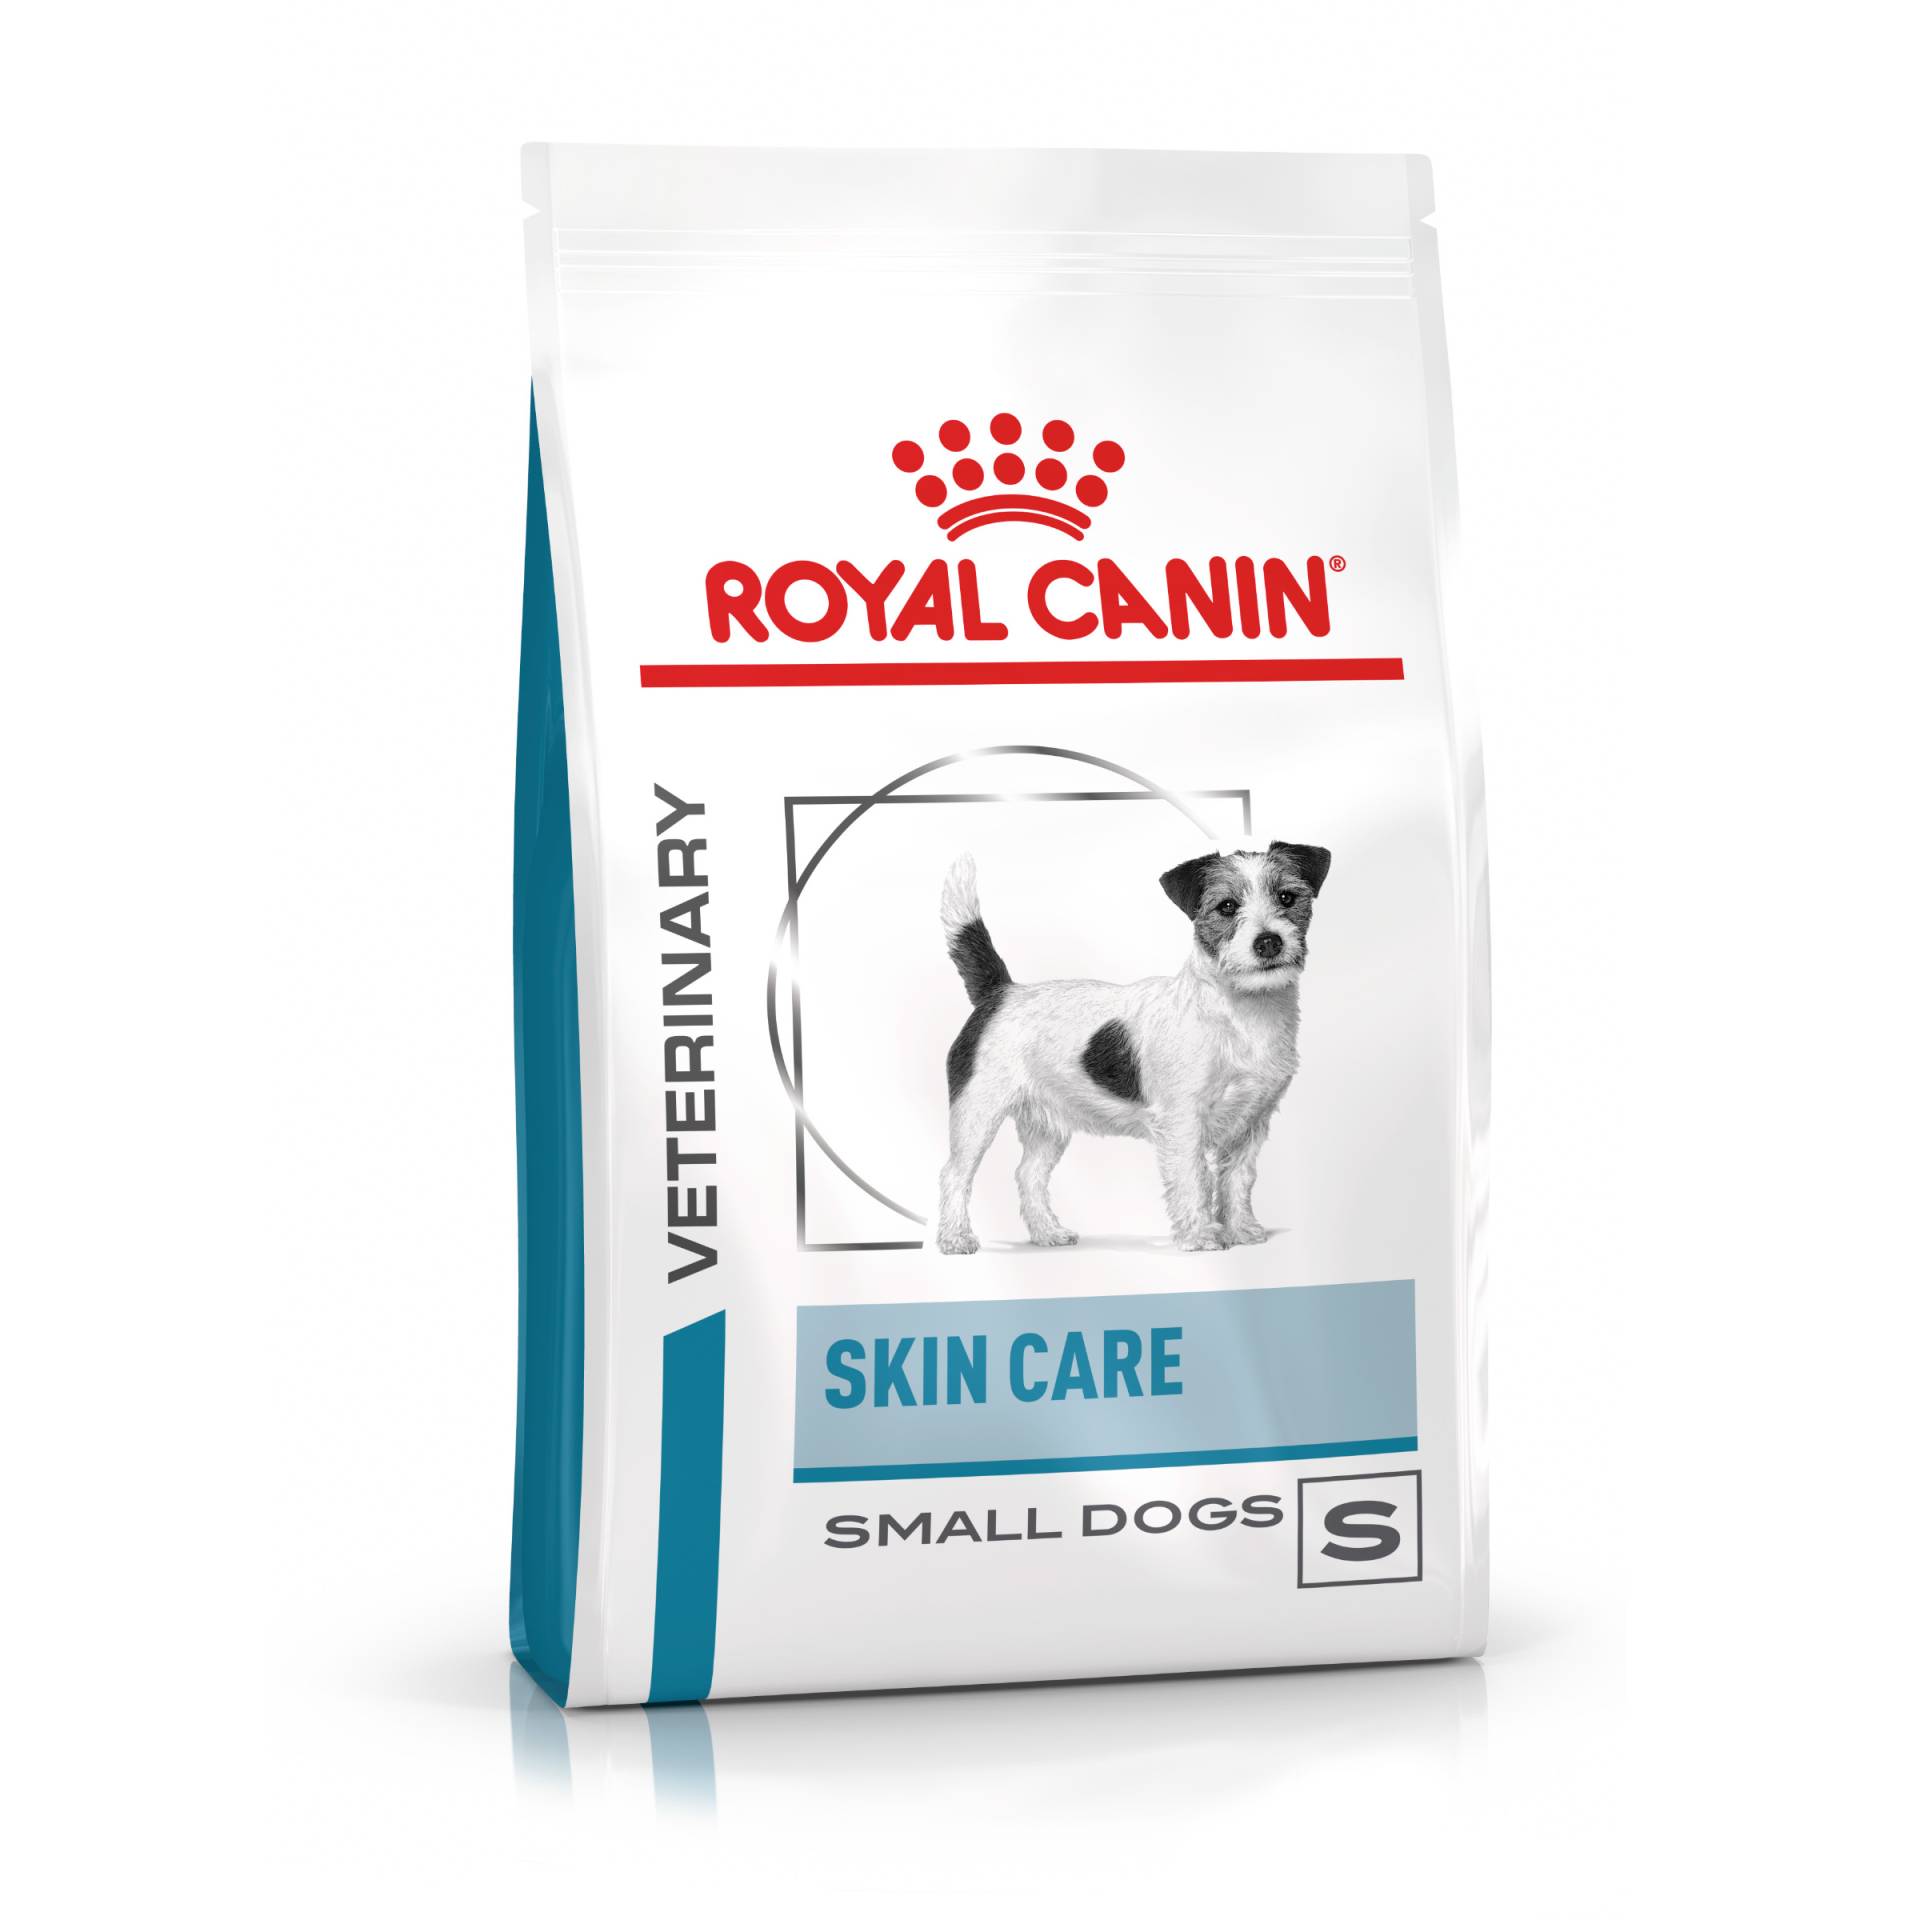 Royal Canin Veterinary Canine Skin Care Small Dog - 4 kg von Royal Canin Veterinary Diet